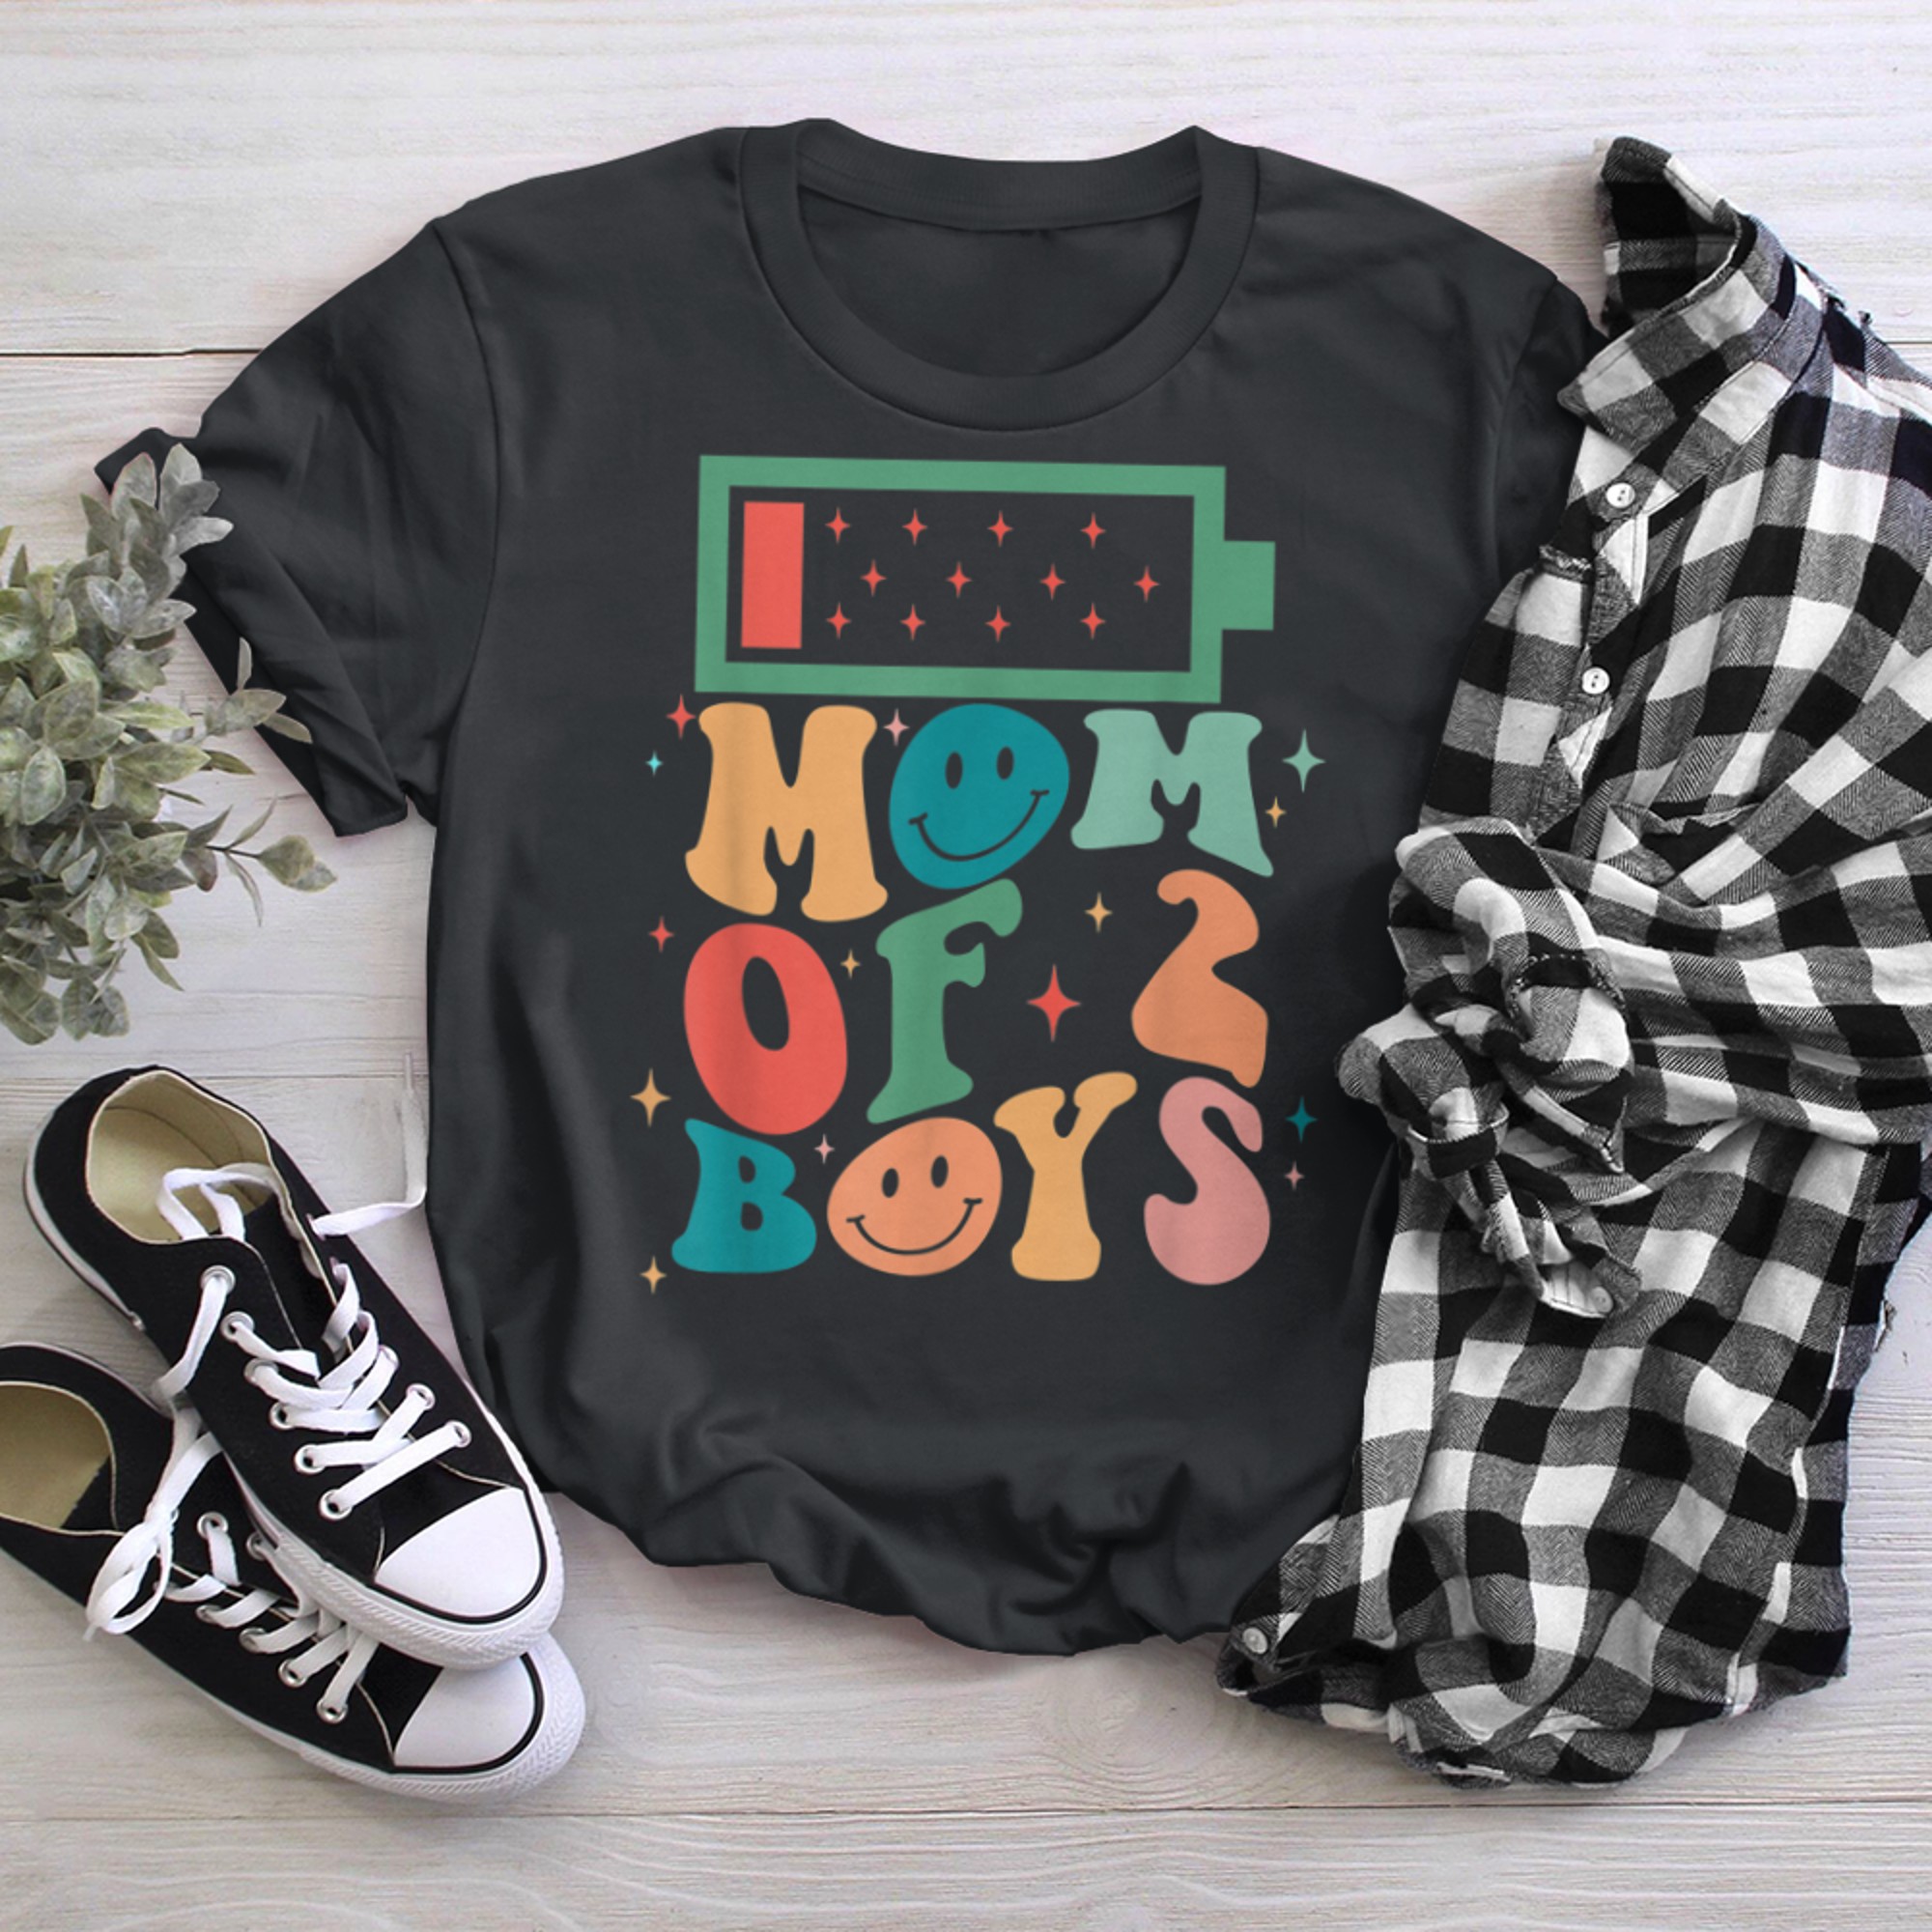 Mom of from Son Mothers Day Birthday (5) t-shirt black